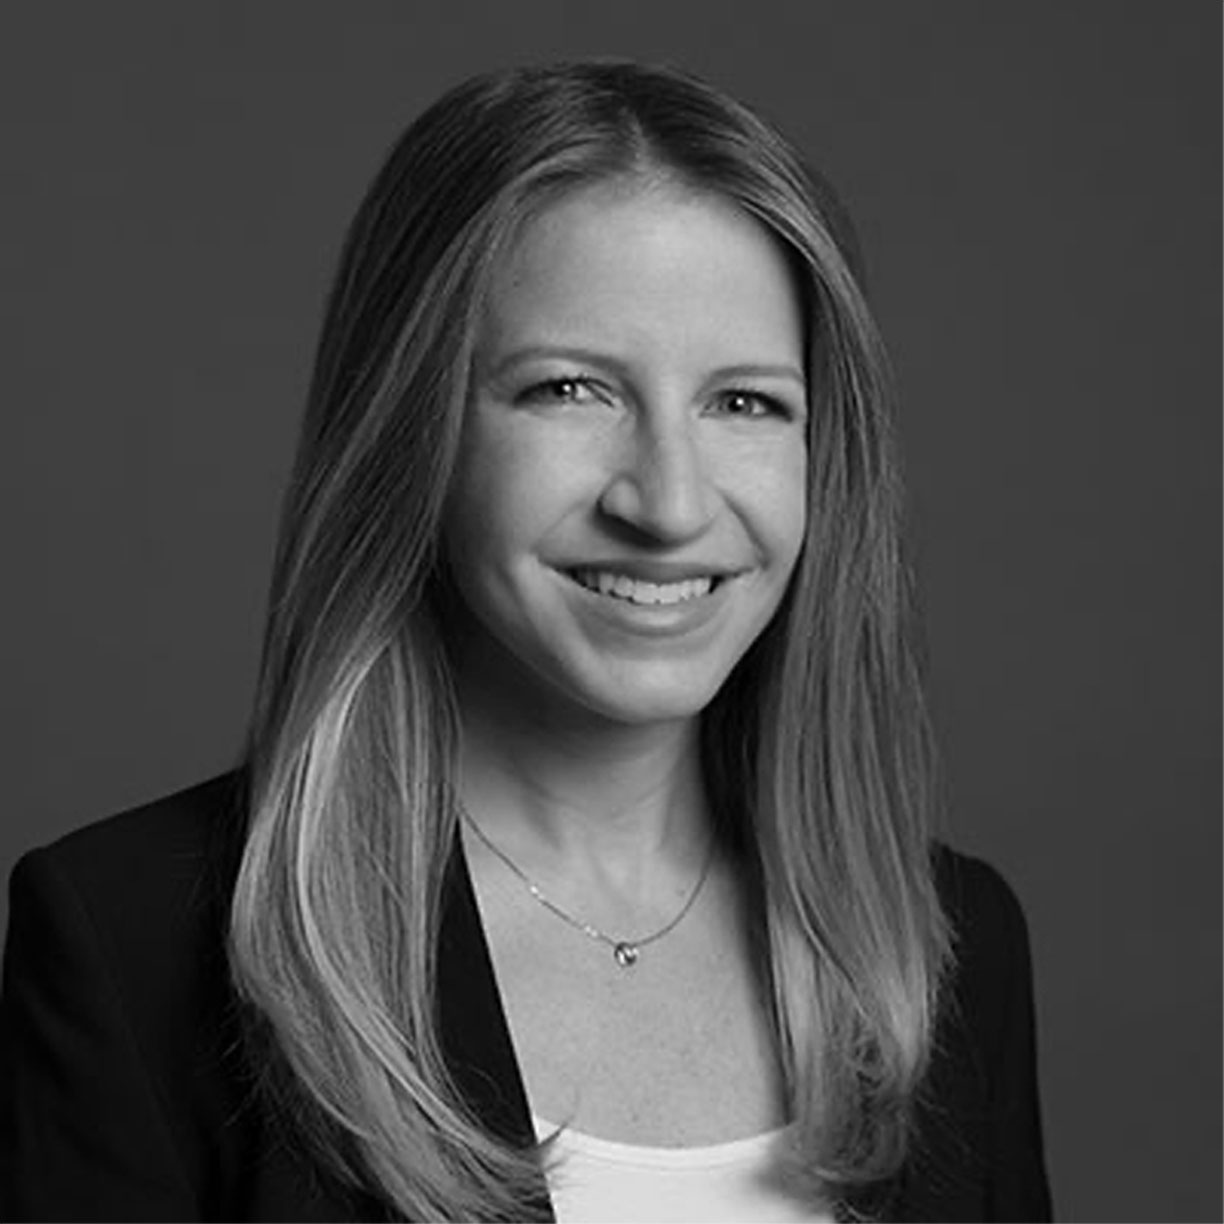 Schoen Cooperman Research (formerly Schoen Consulting) CEO and partner Carly Cooperman